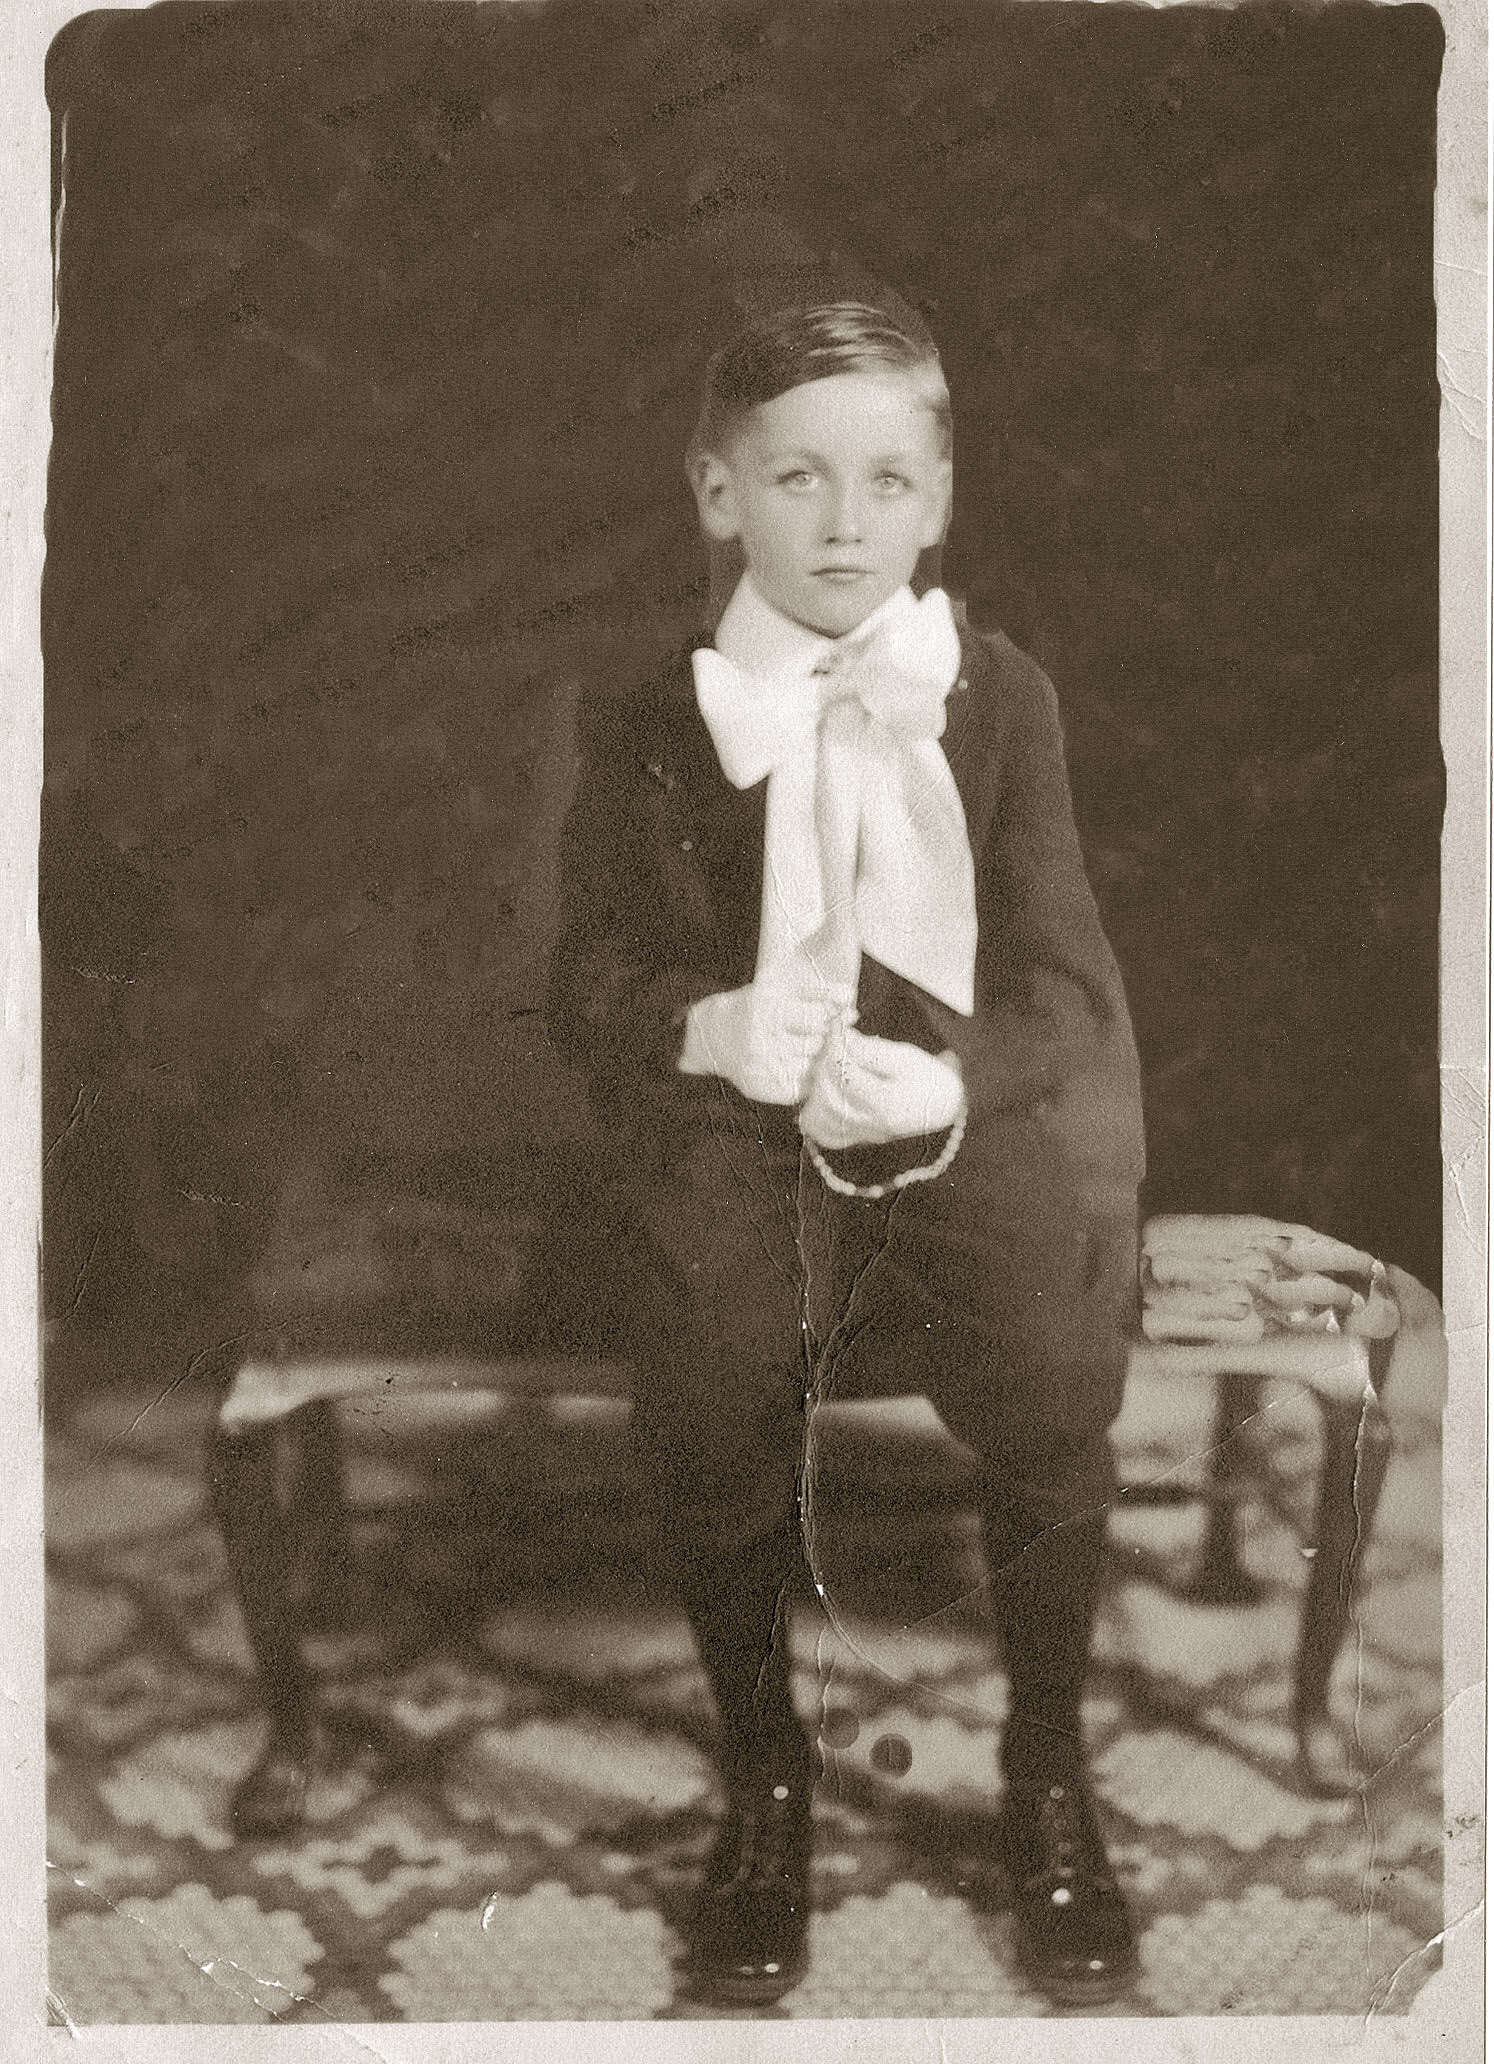 May 1935. Ed Woods in his Our Lady of Lourdes school uniform, West 143rd St. New York City, on Confirmation Day. View full size.